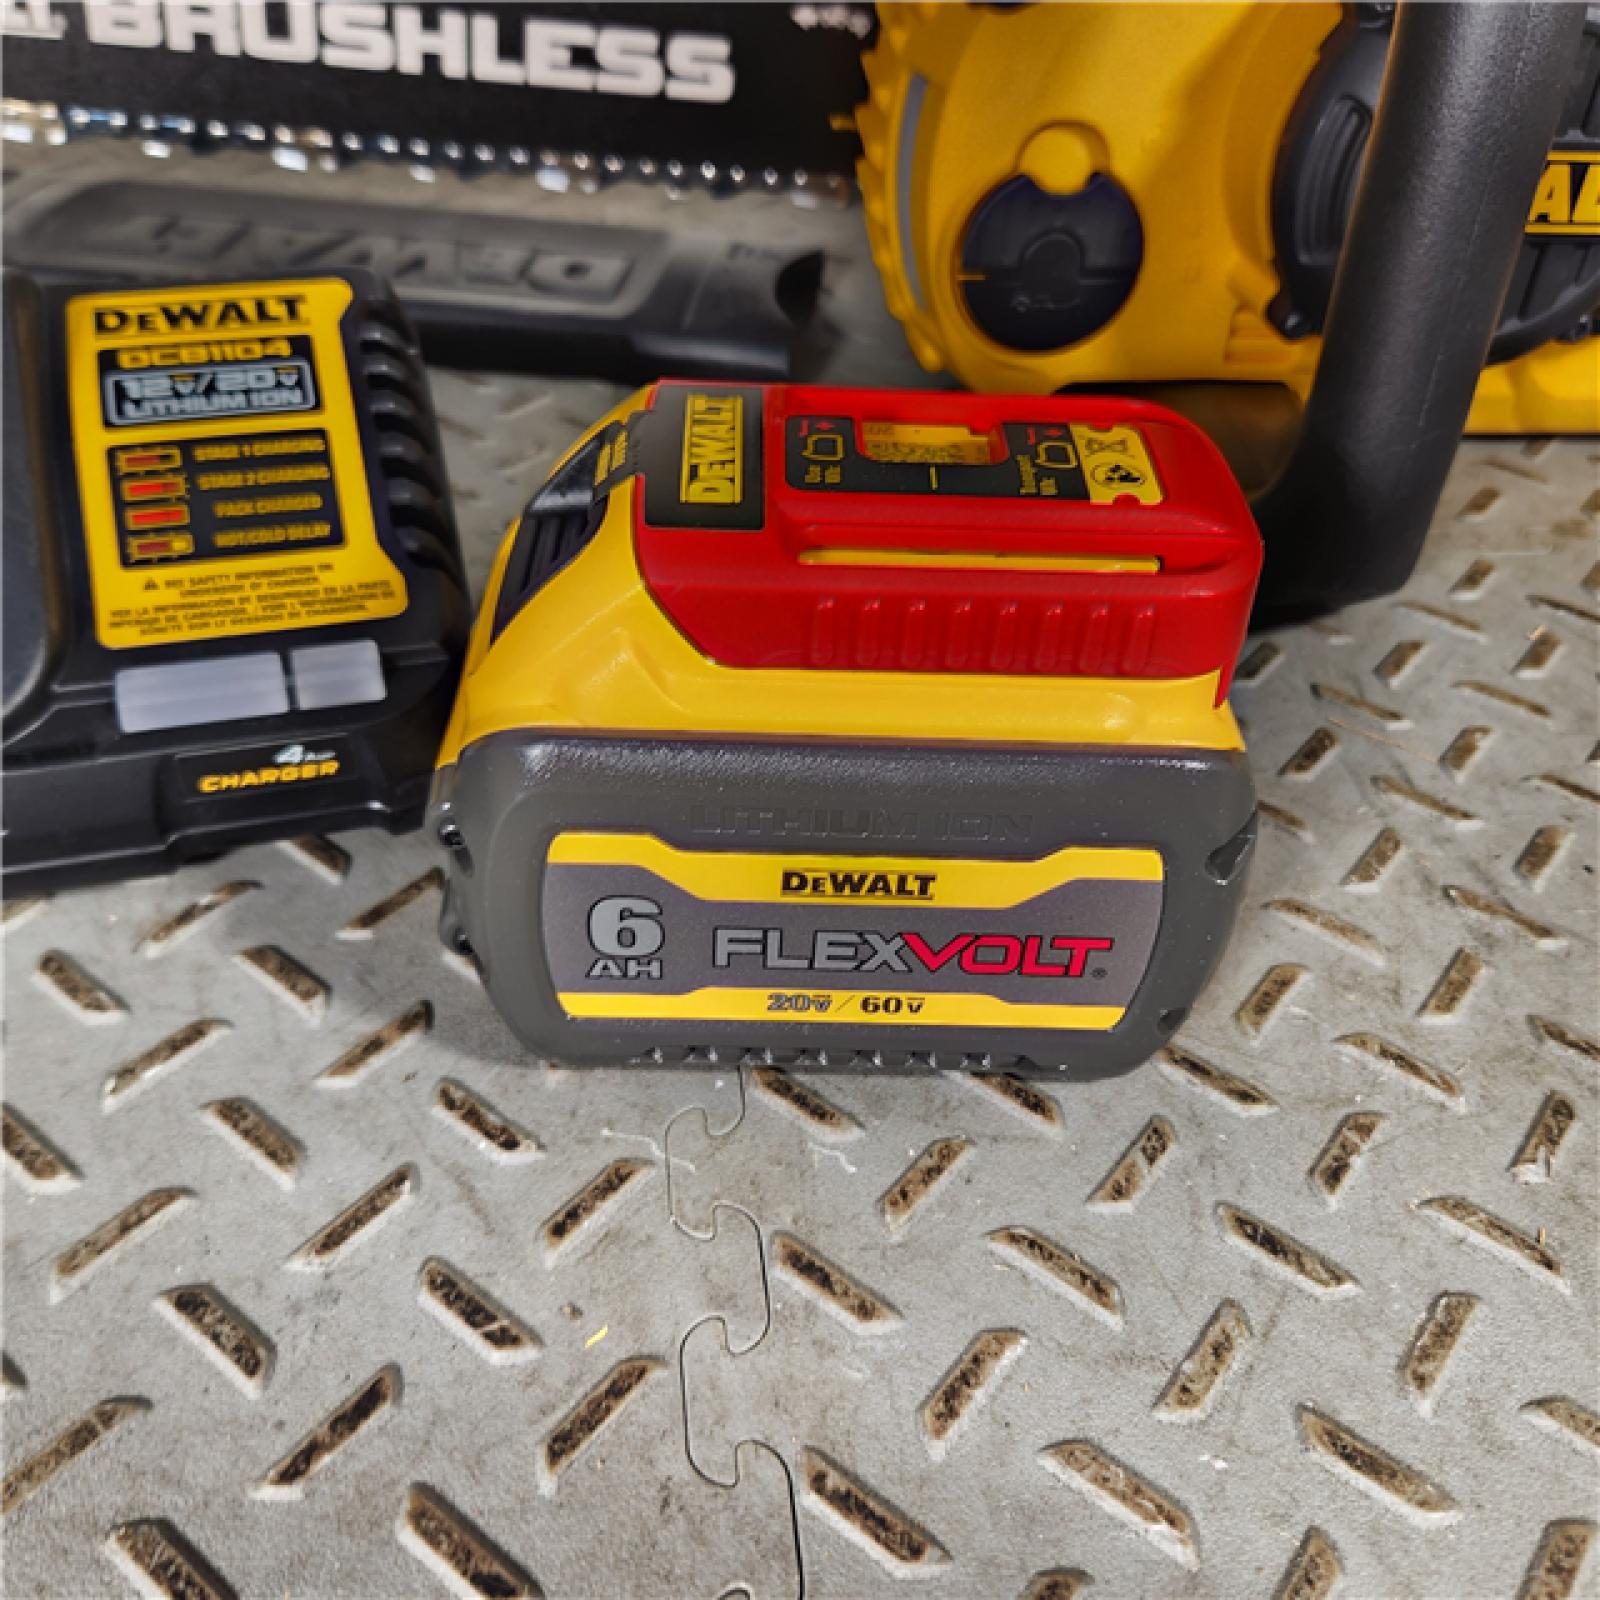 Houston location- AS-IS DEWALT 60V MAX 16in. Brushless Battery Powered Chainsaw Kit with (1) FLEXVOLT 2Ah Battery & Charger Appears in new condition